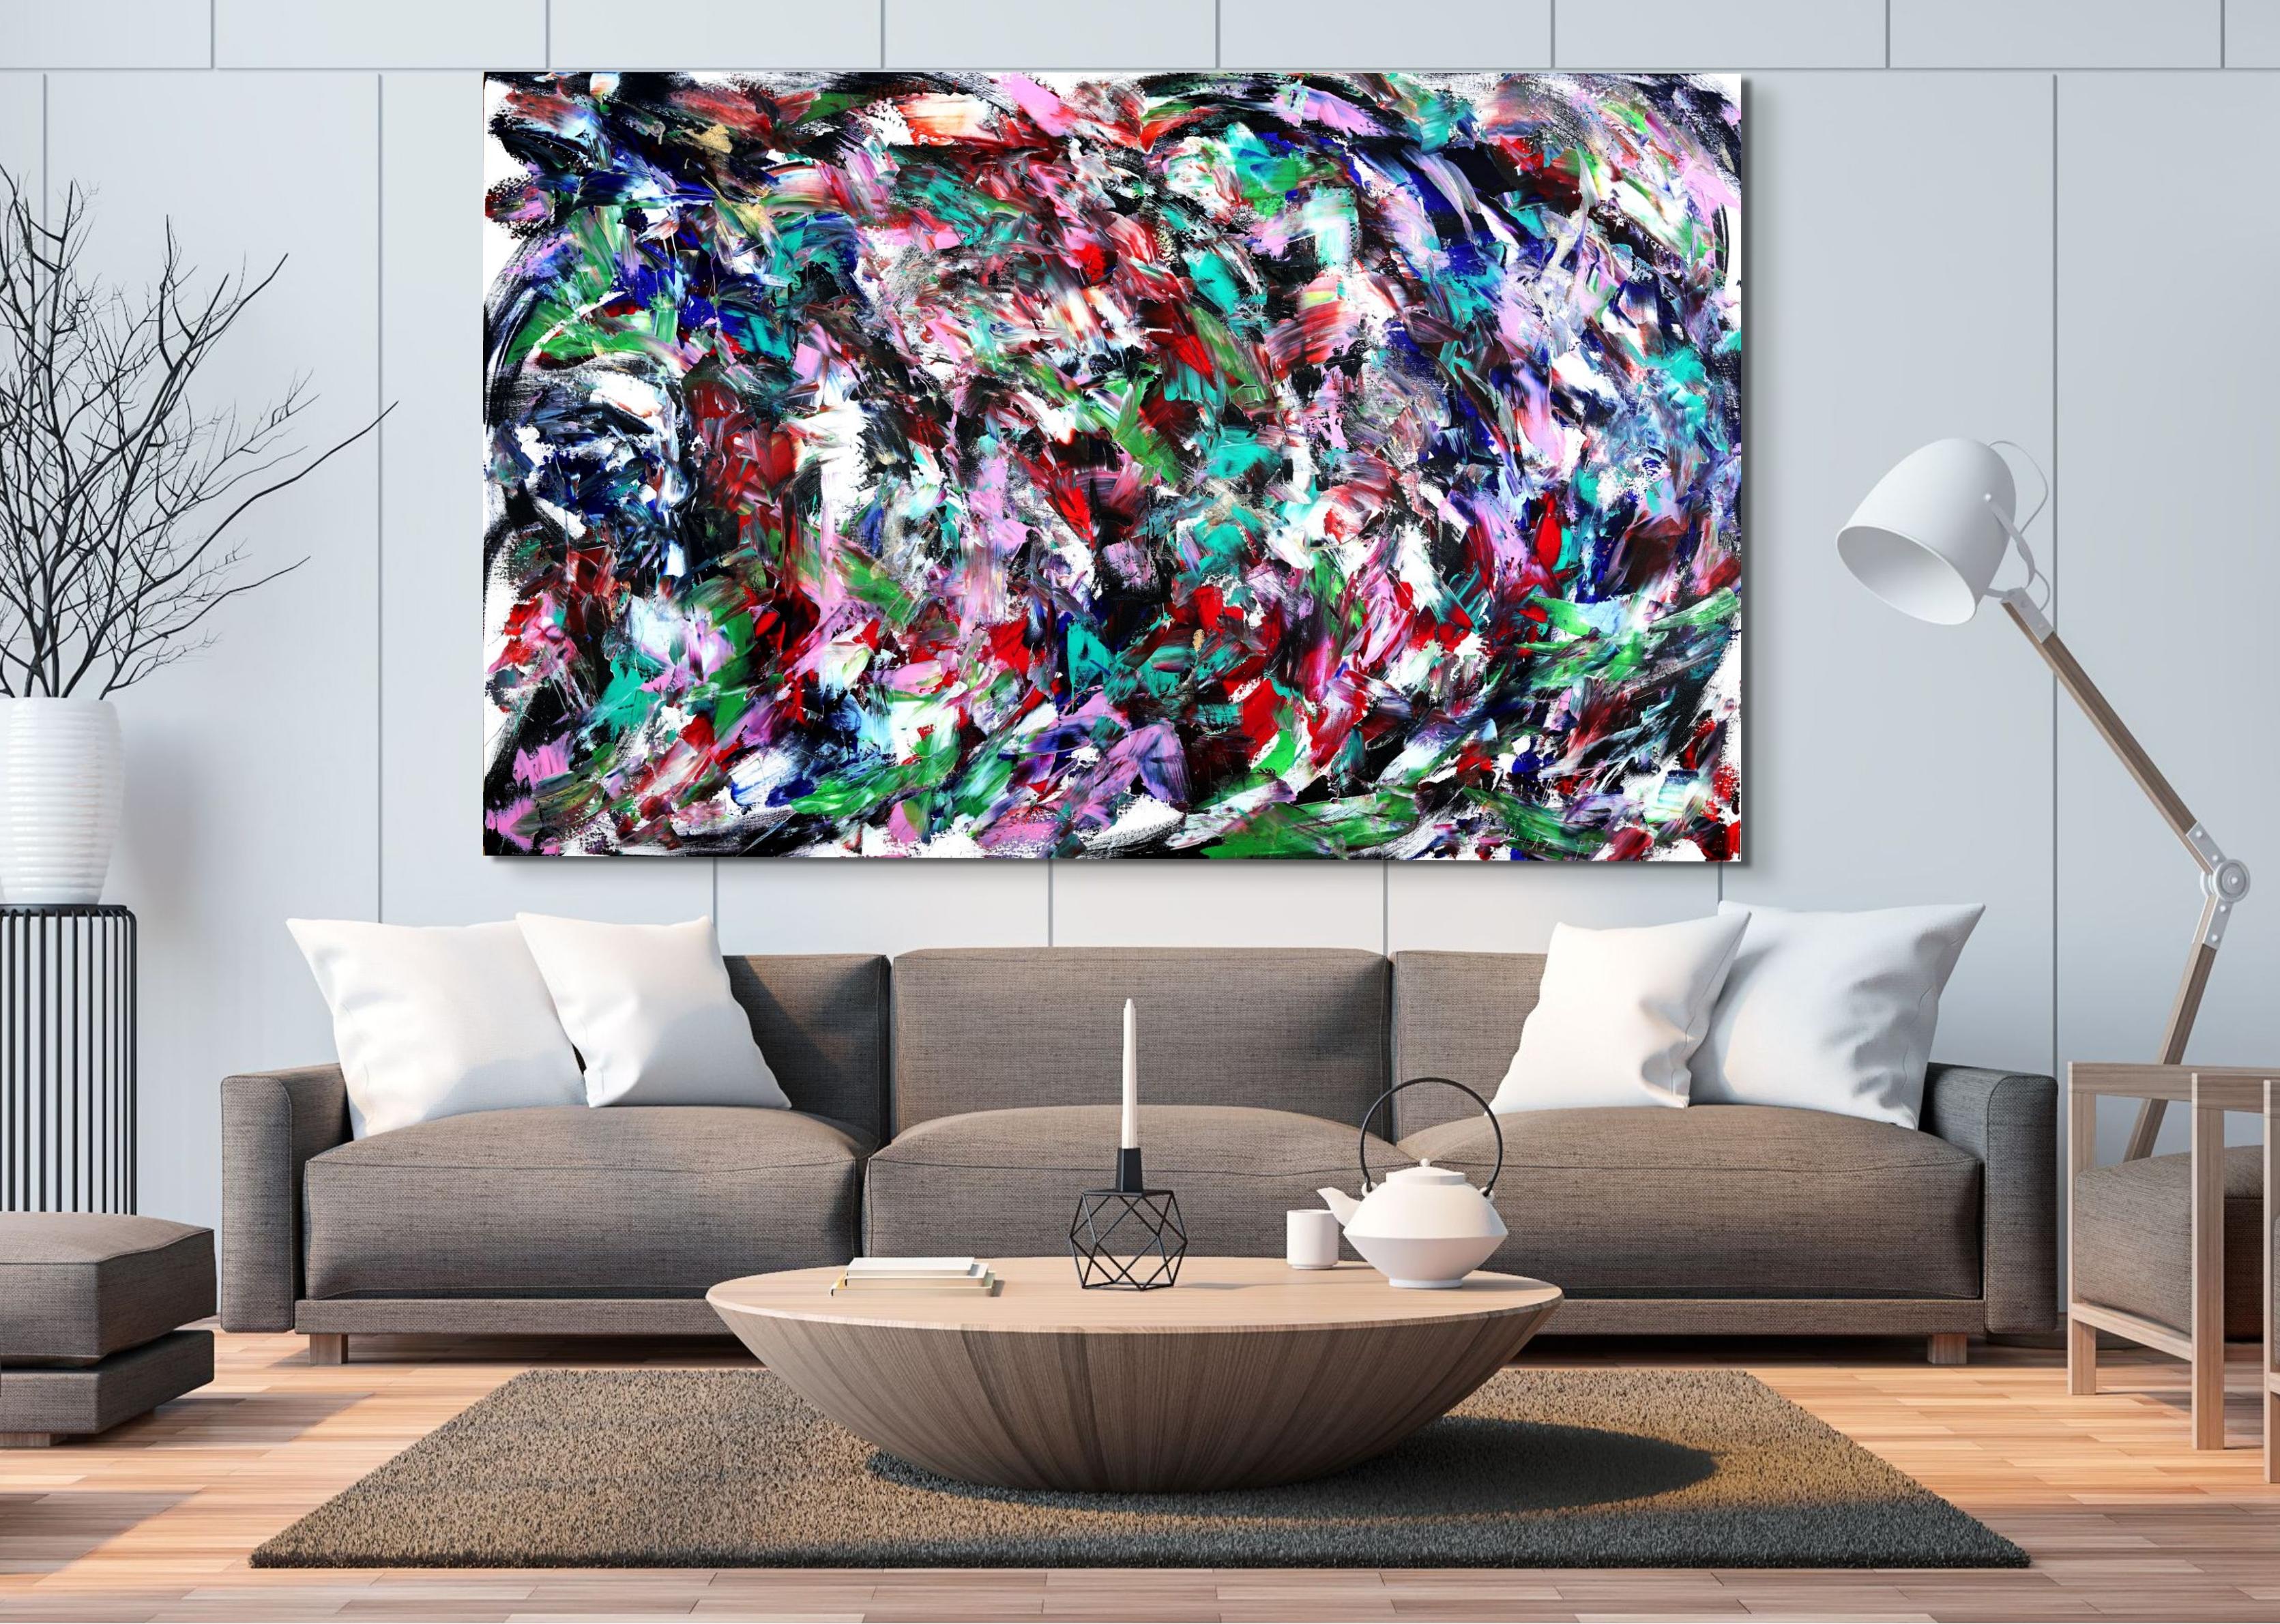 Elegant Motion - Abstract Expressionist Painting by Estelle Asmodelle